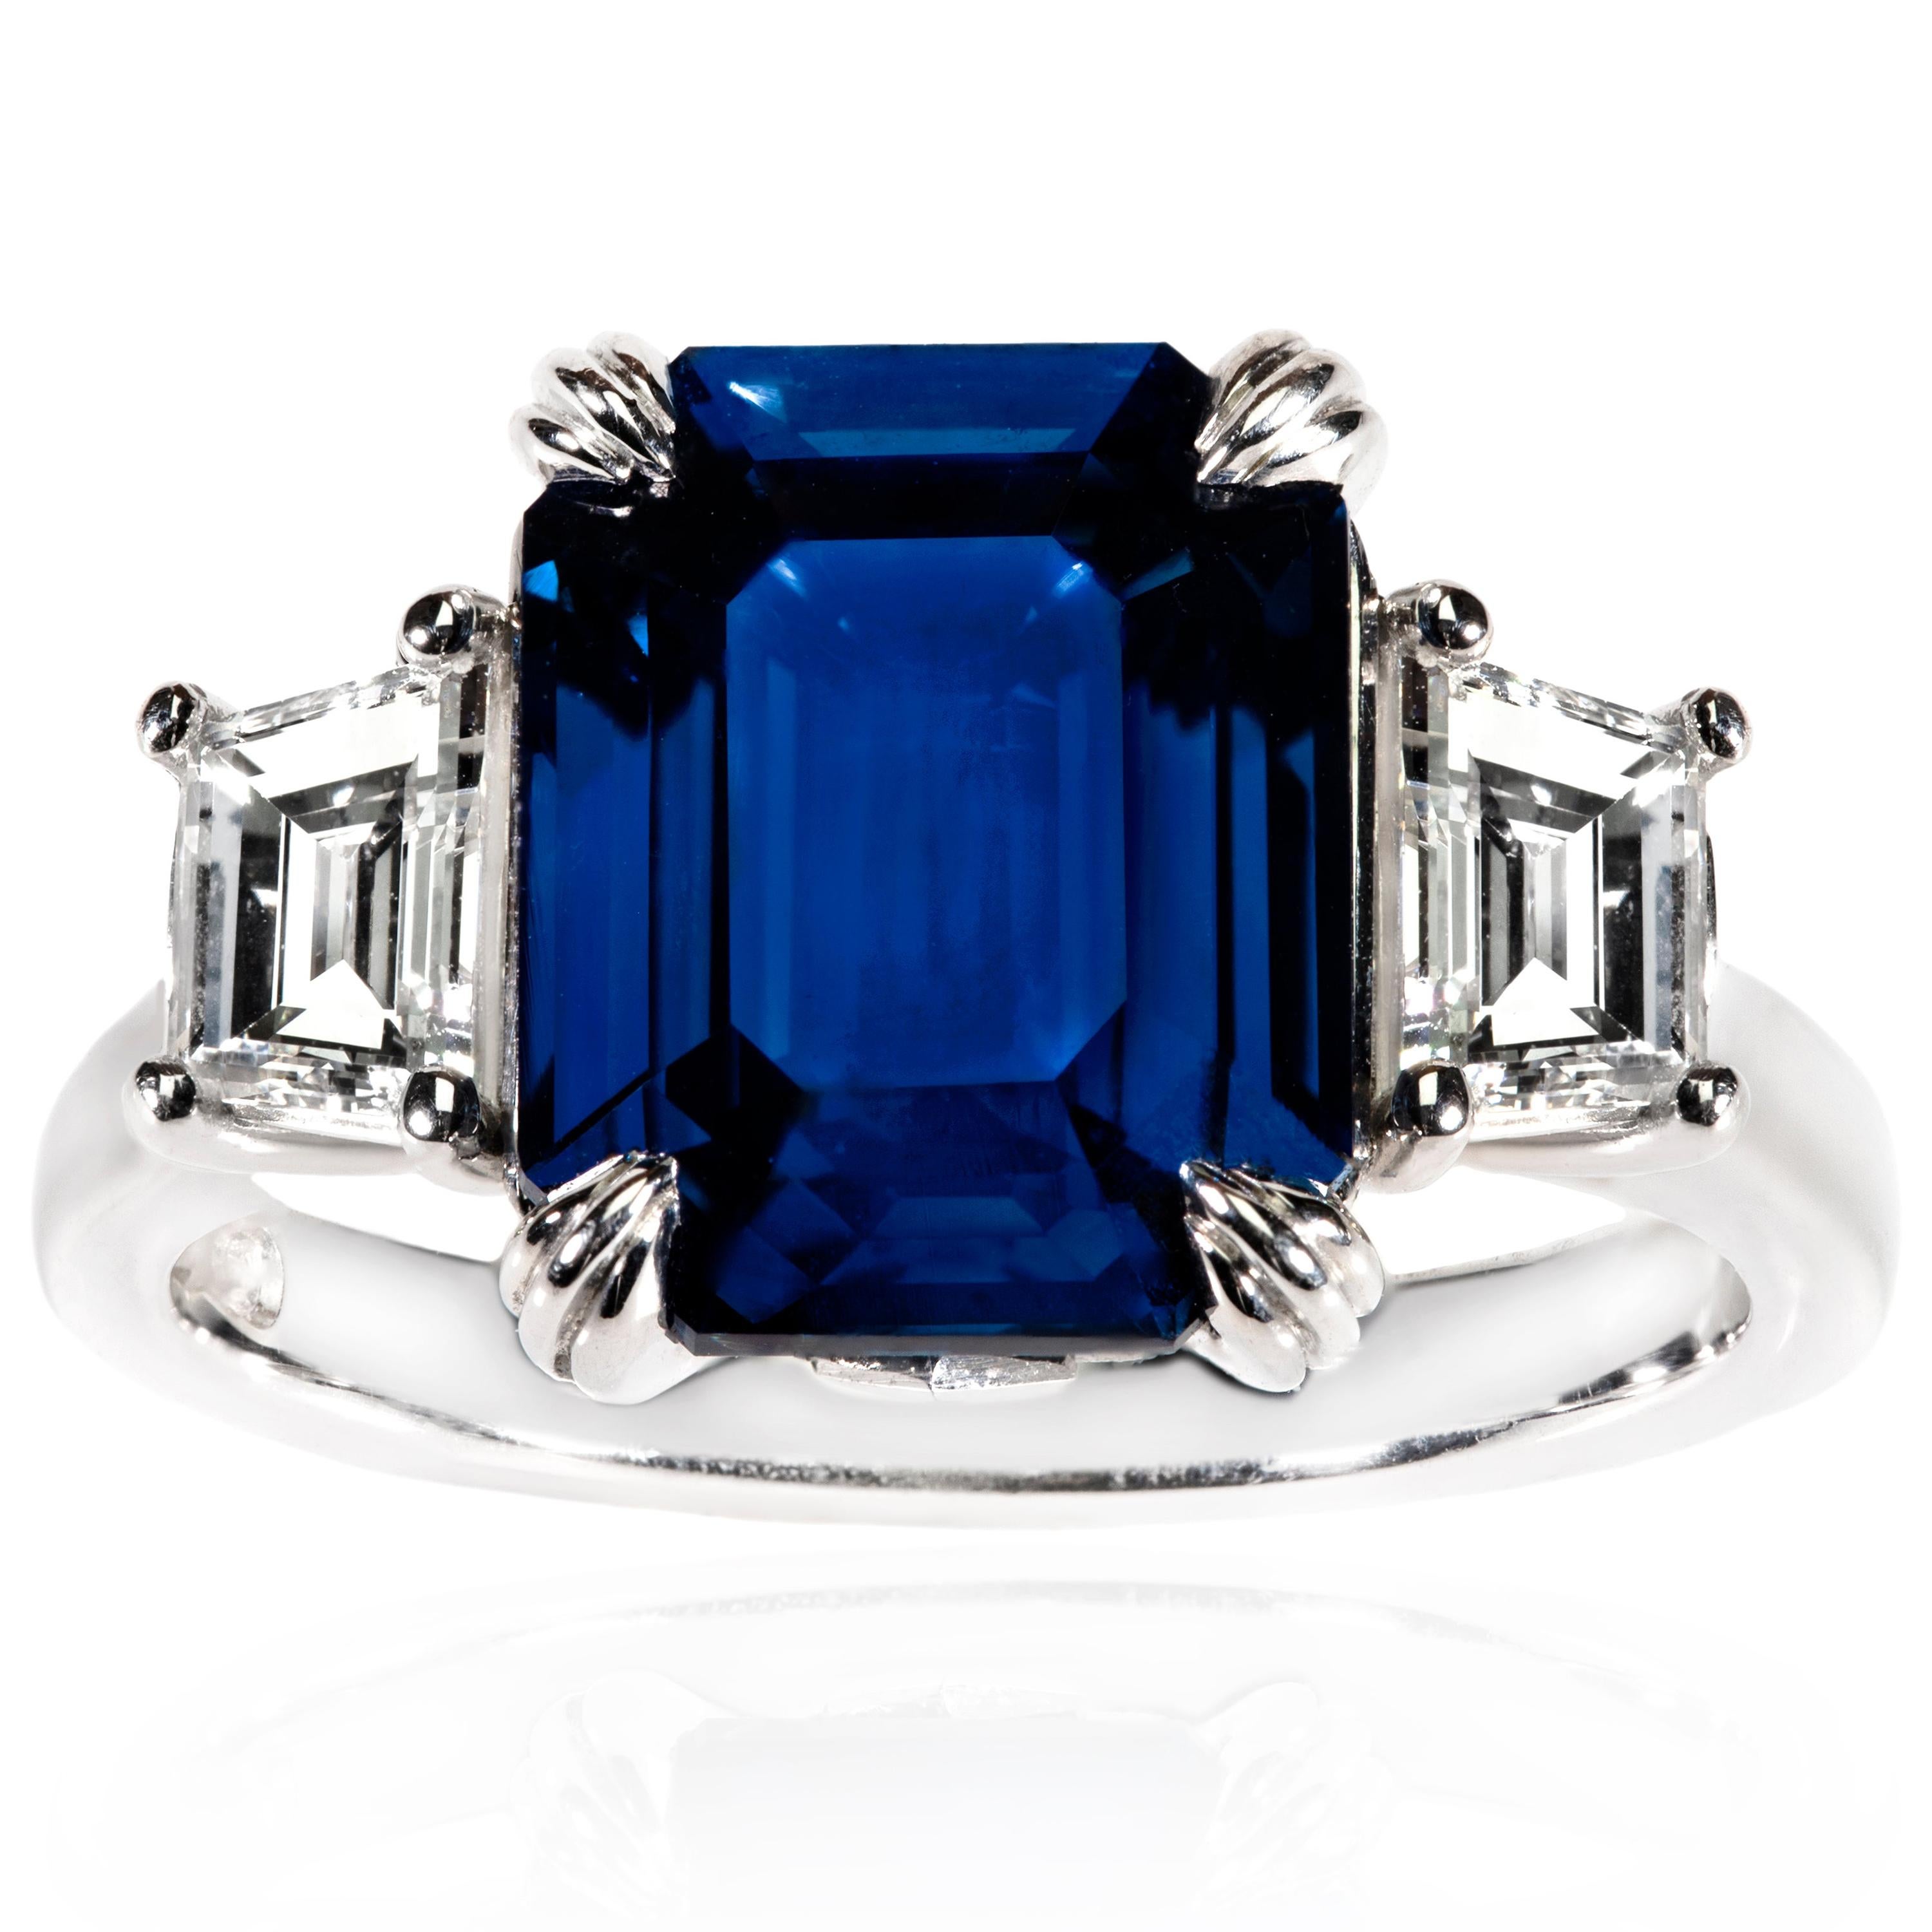 5.12 Carat Madagascan Sapphire and Trapezoid Diamond Ring in 18 Carat White Gold